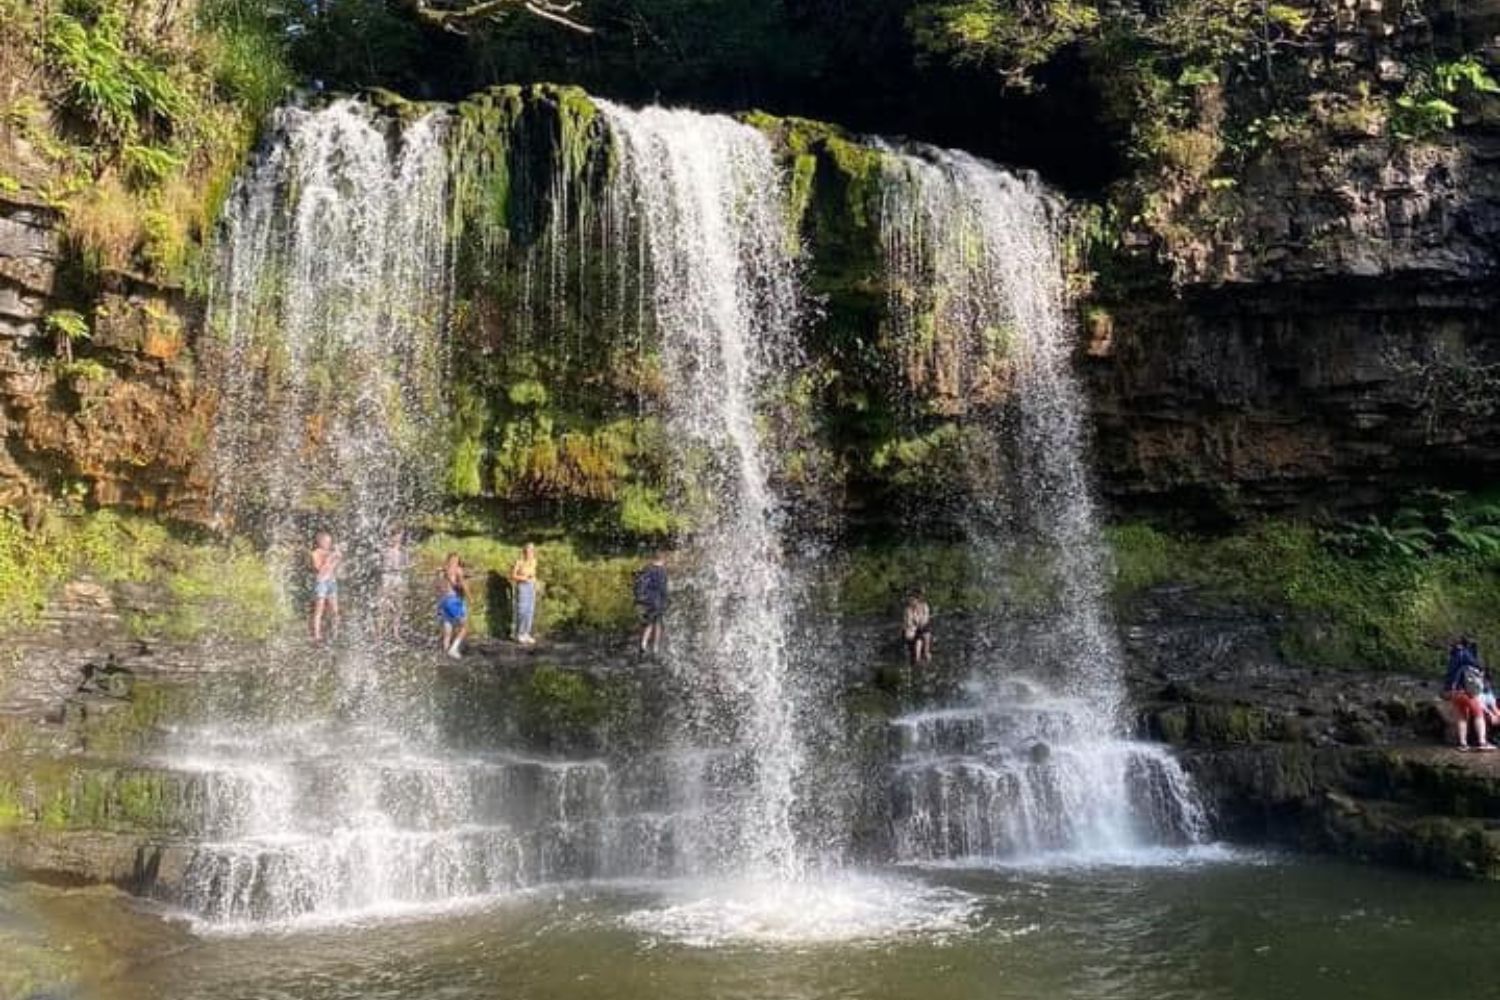 People stood beneath mossy waterfall, Brecon Beacons